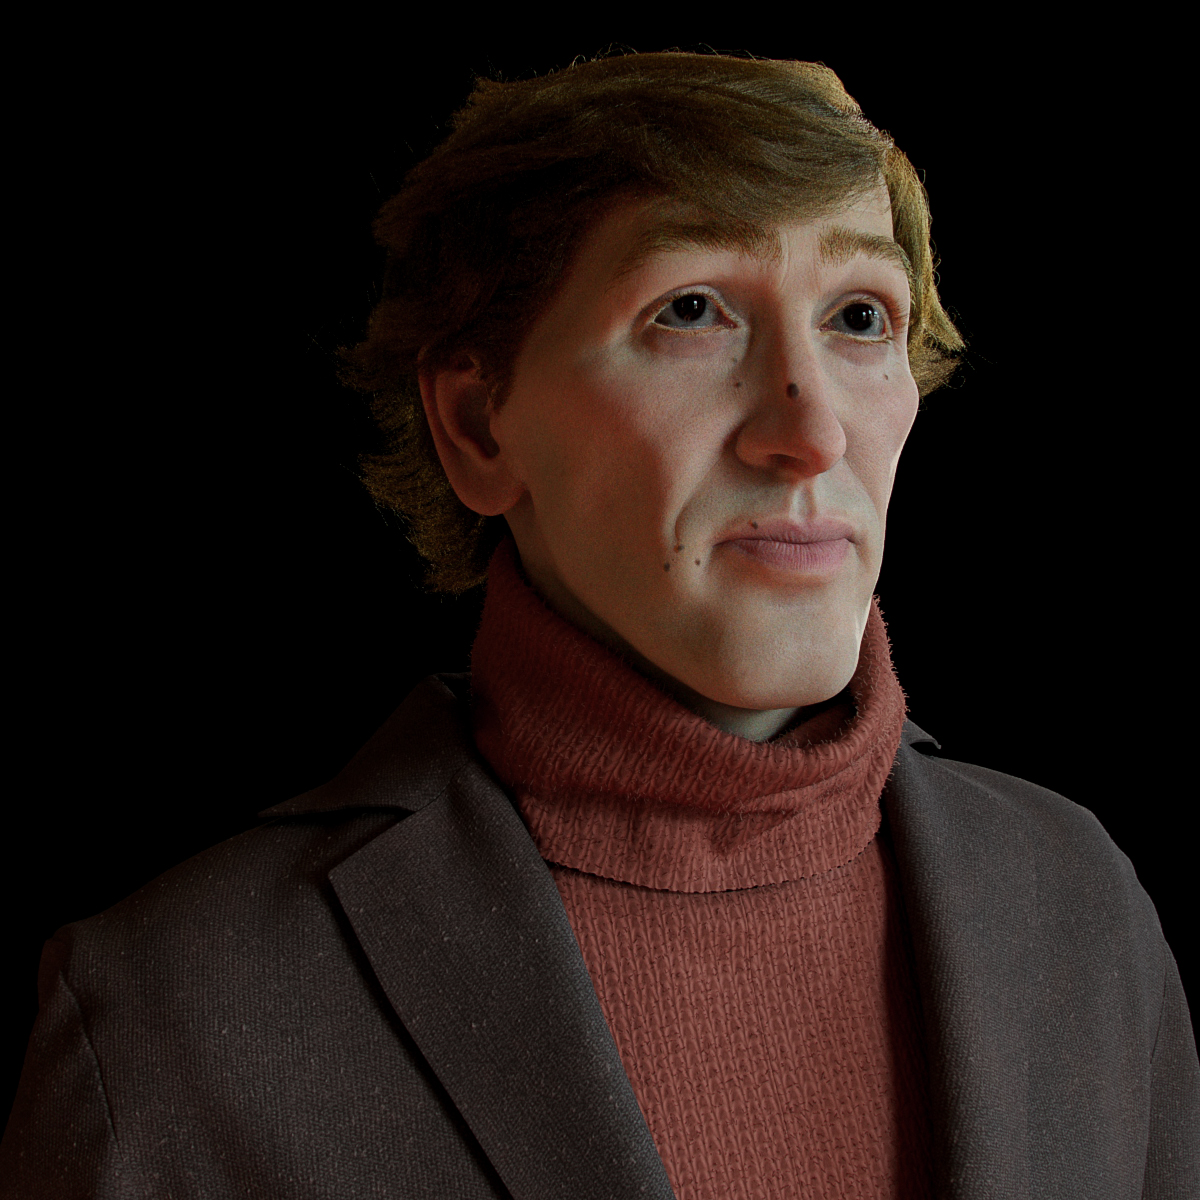 My latest work
Bobby Fischer #likeness sculpt
sculpting in #zbrush 
render and hair in #MAYA  and #arnoldrender